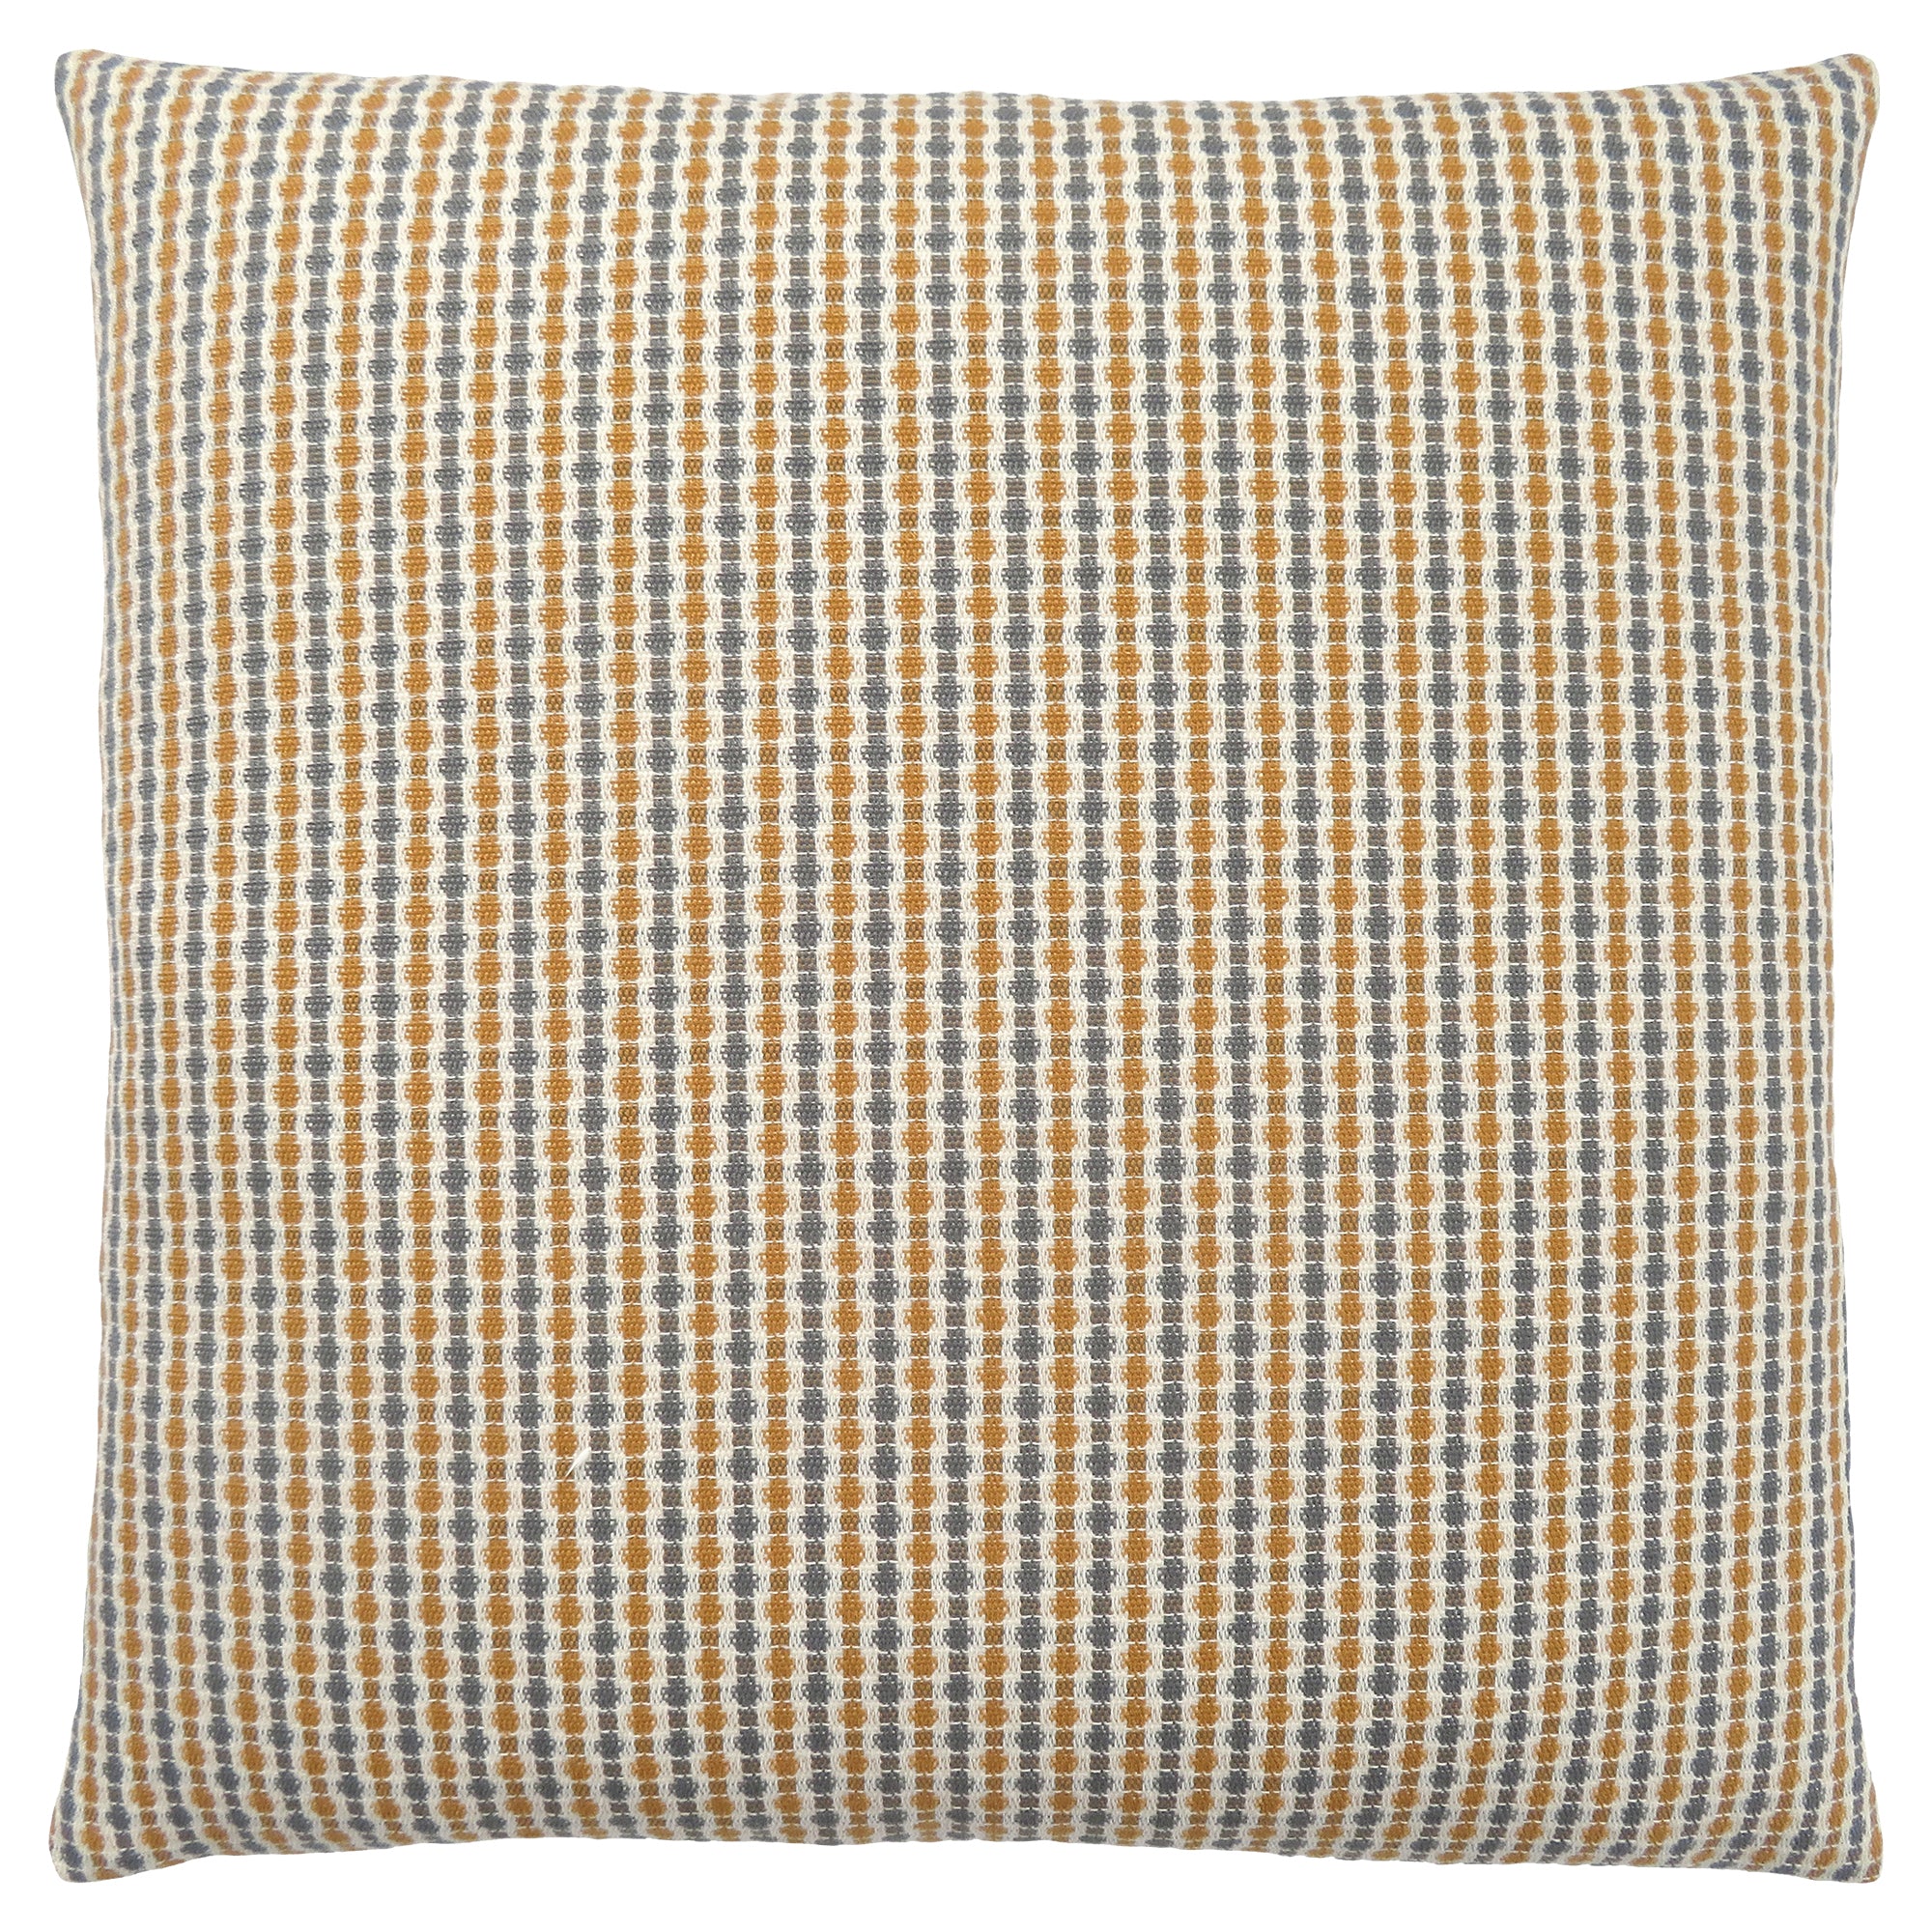 MN-469234    Pillows, 18 X 18 Square, Insert Included, Decorative Throw, Accent, Sofa, Couch, Bed, Soft Polyester Woven Fabric, Hypoallergenic Soft Polyester Insert, Gold And Grey, Abstract Dot Design, Classic Dot Design, Classic